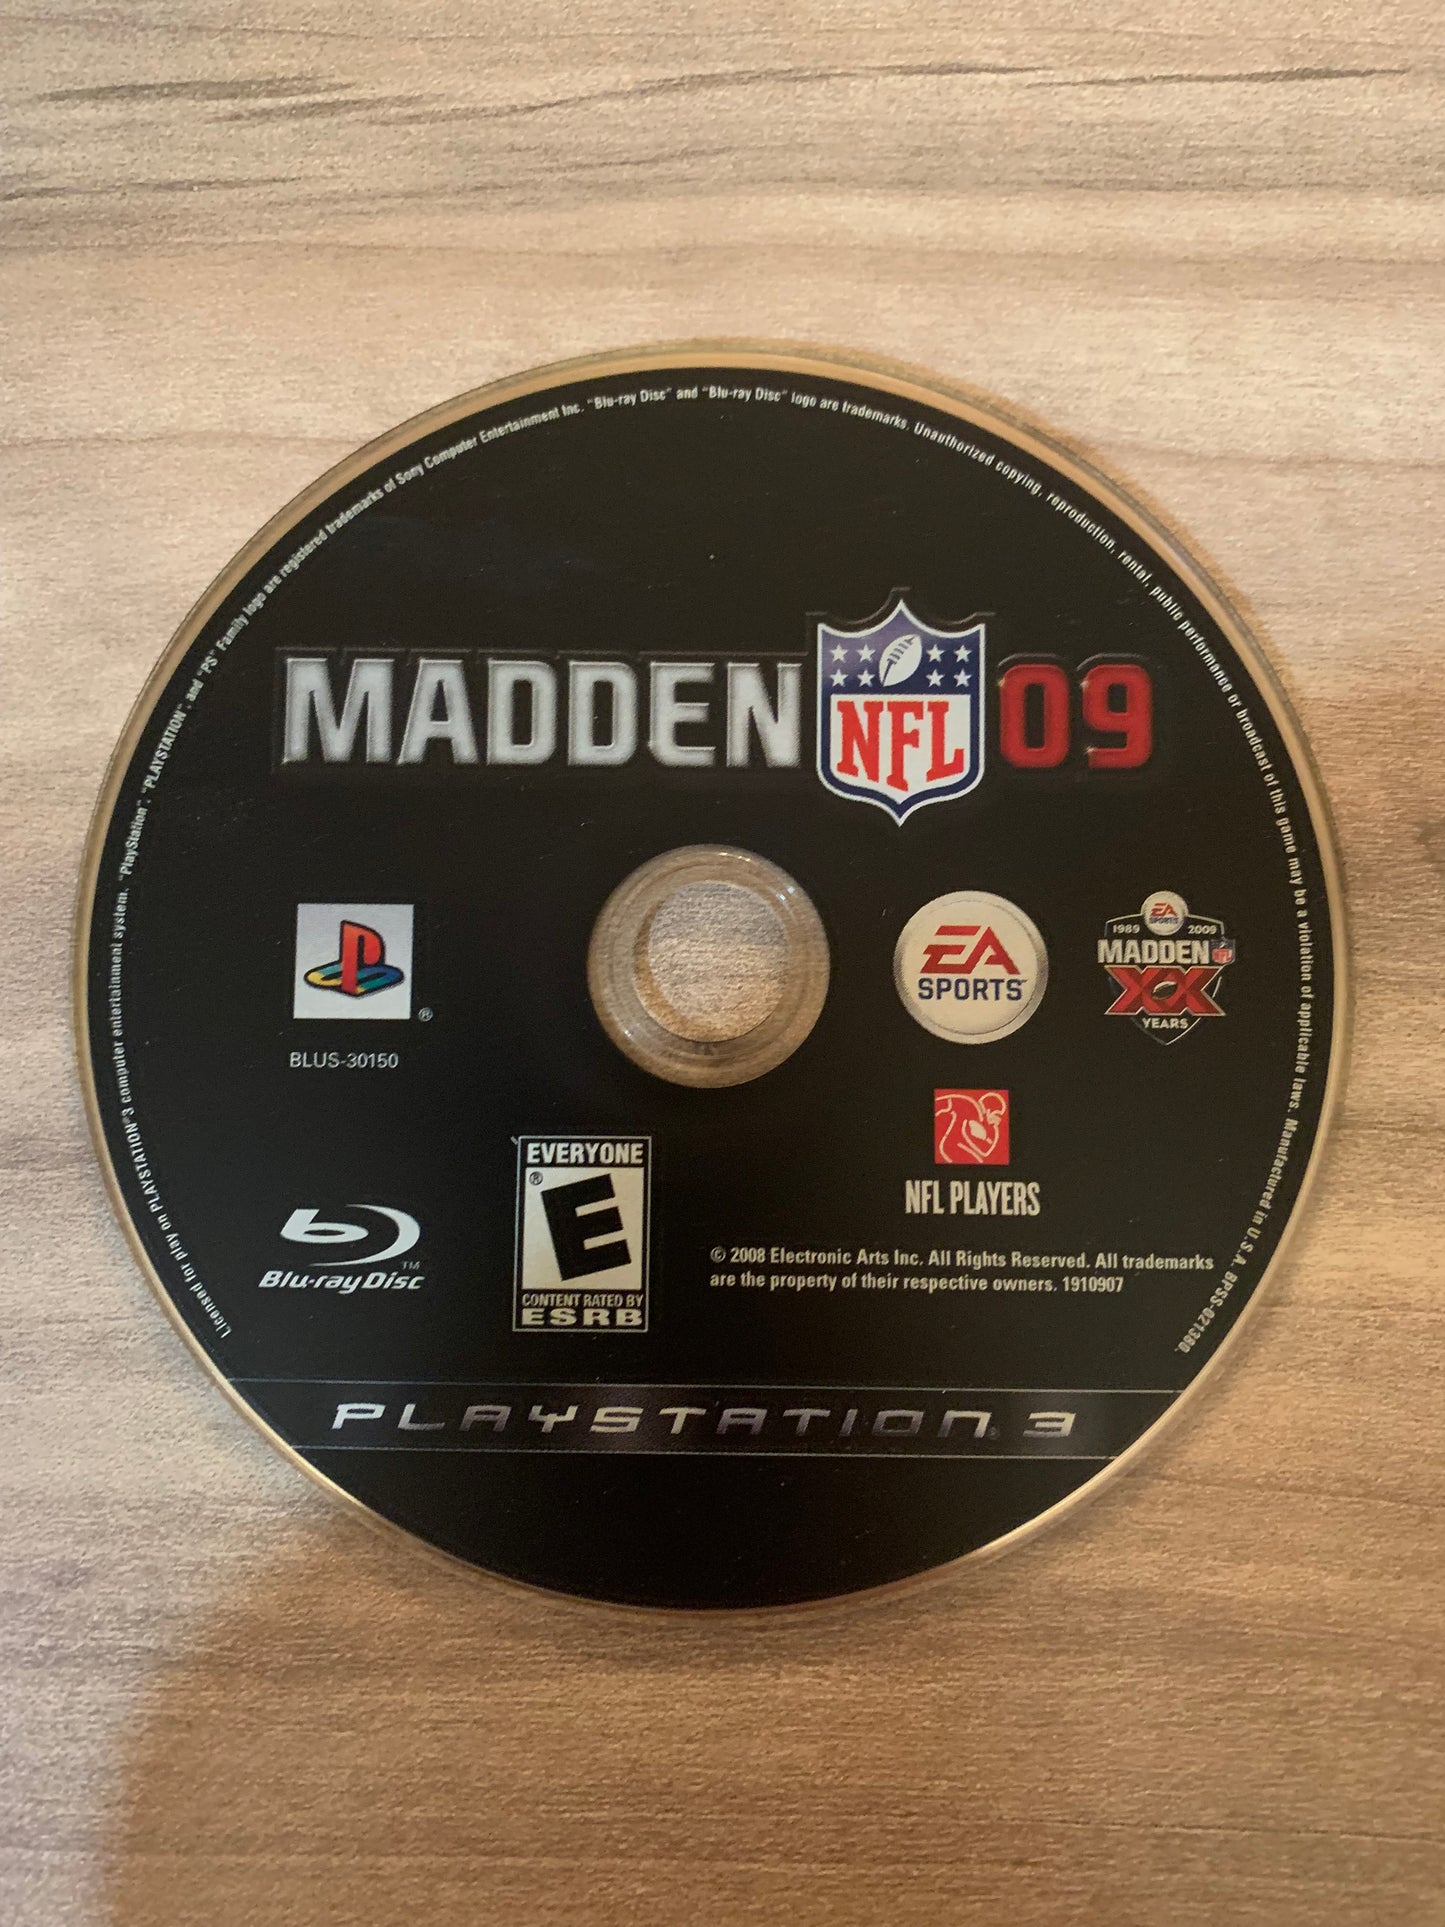 SONY PLAYSTATiON 3 [PS3] | MADDEN NFL 09 | 20th ANNiVERSARY COLLECTOR'S EDiTiON